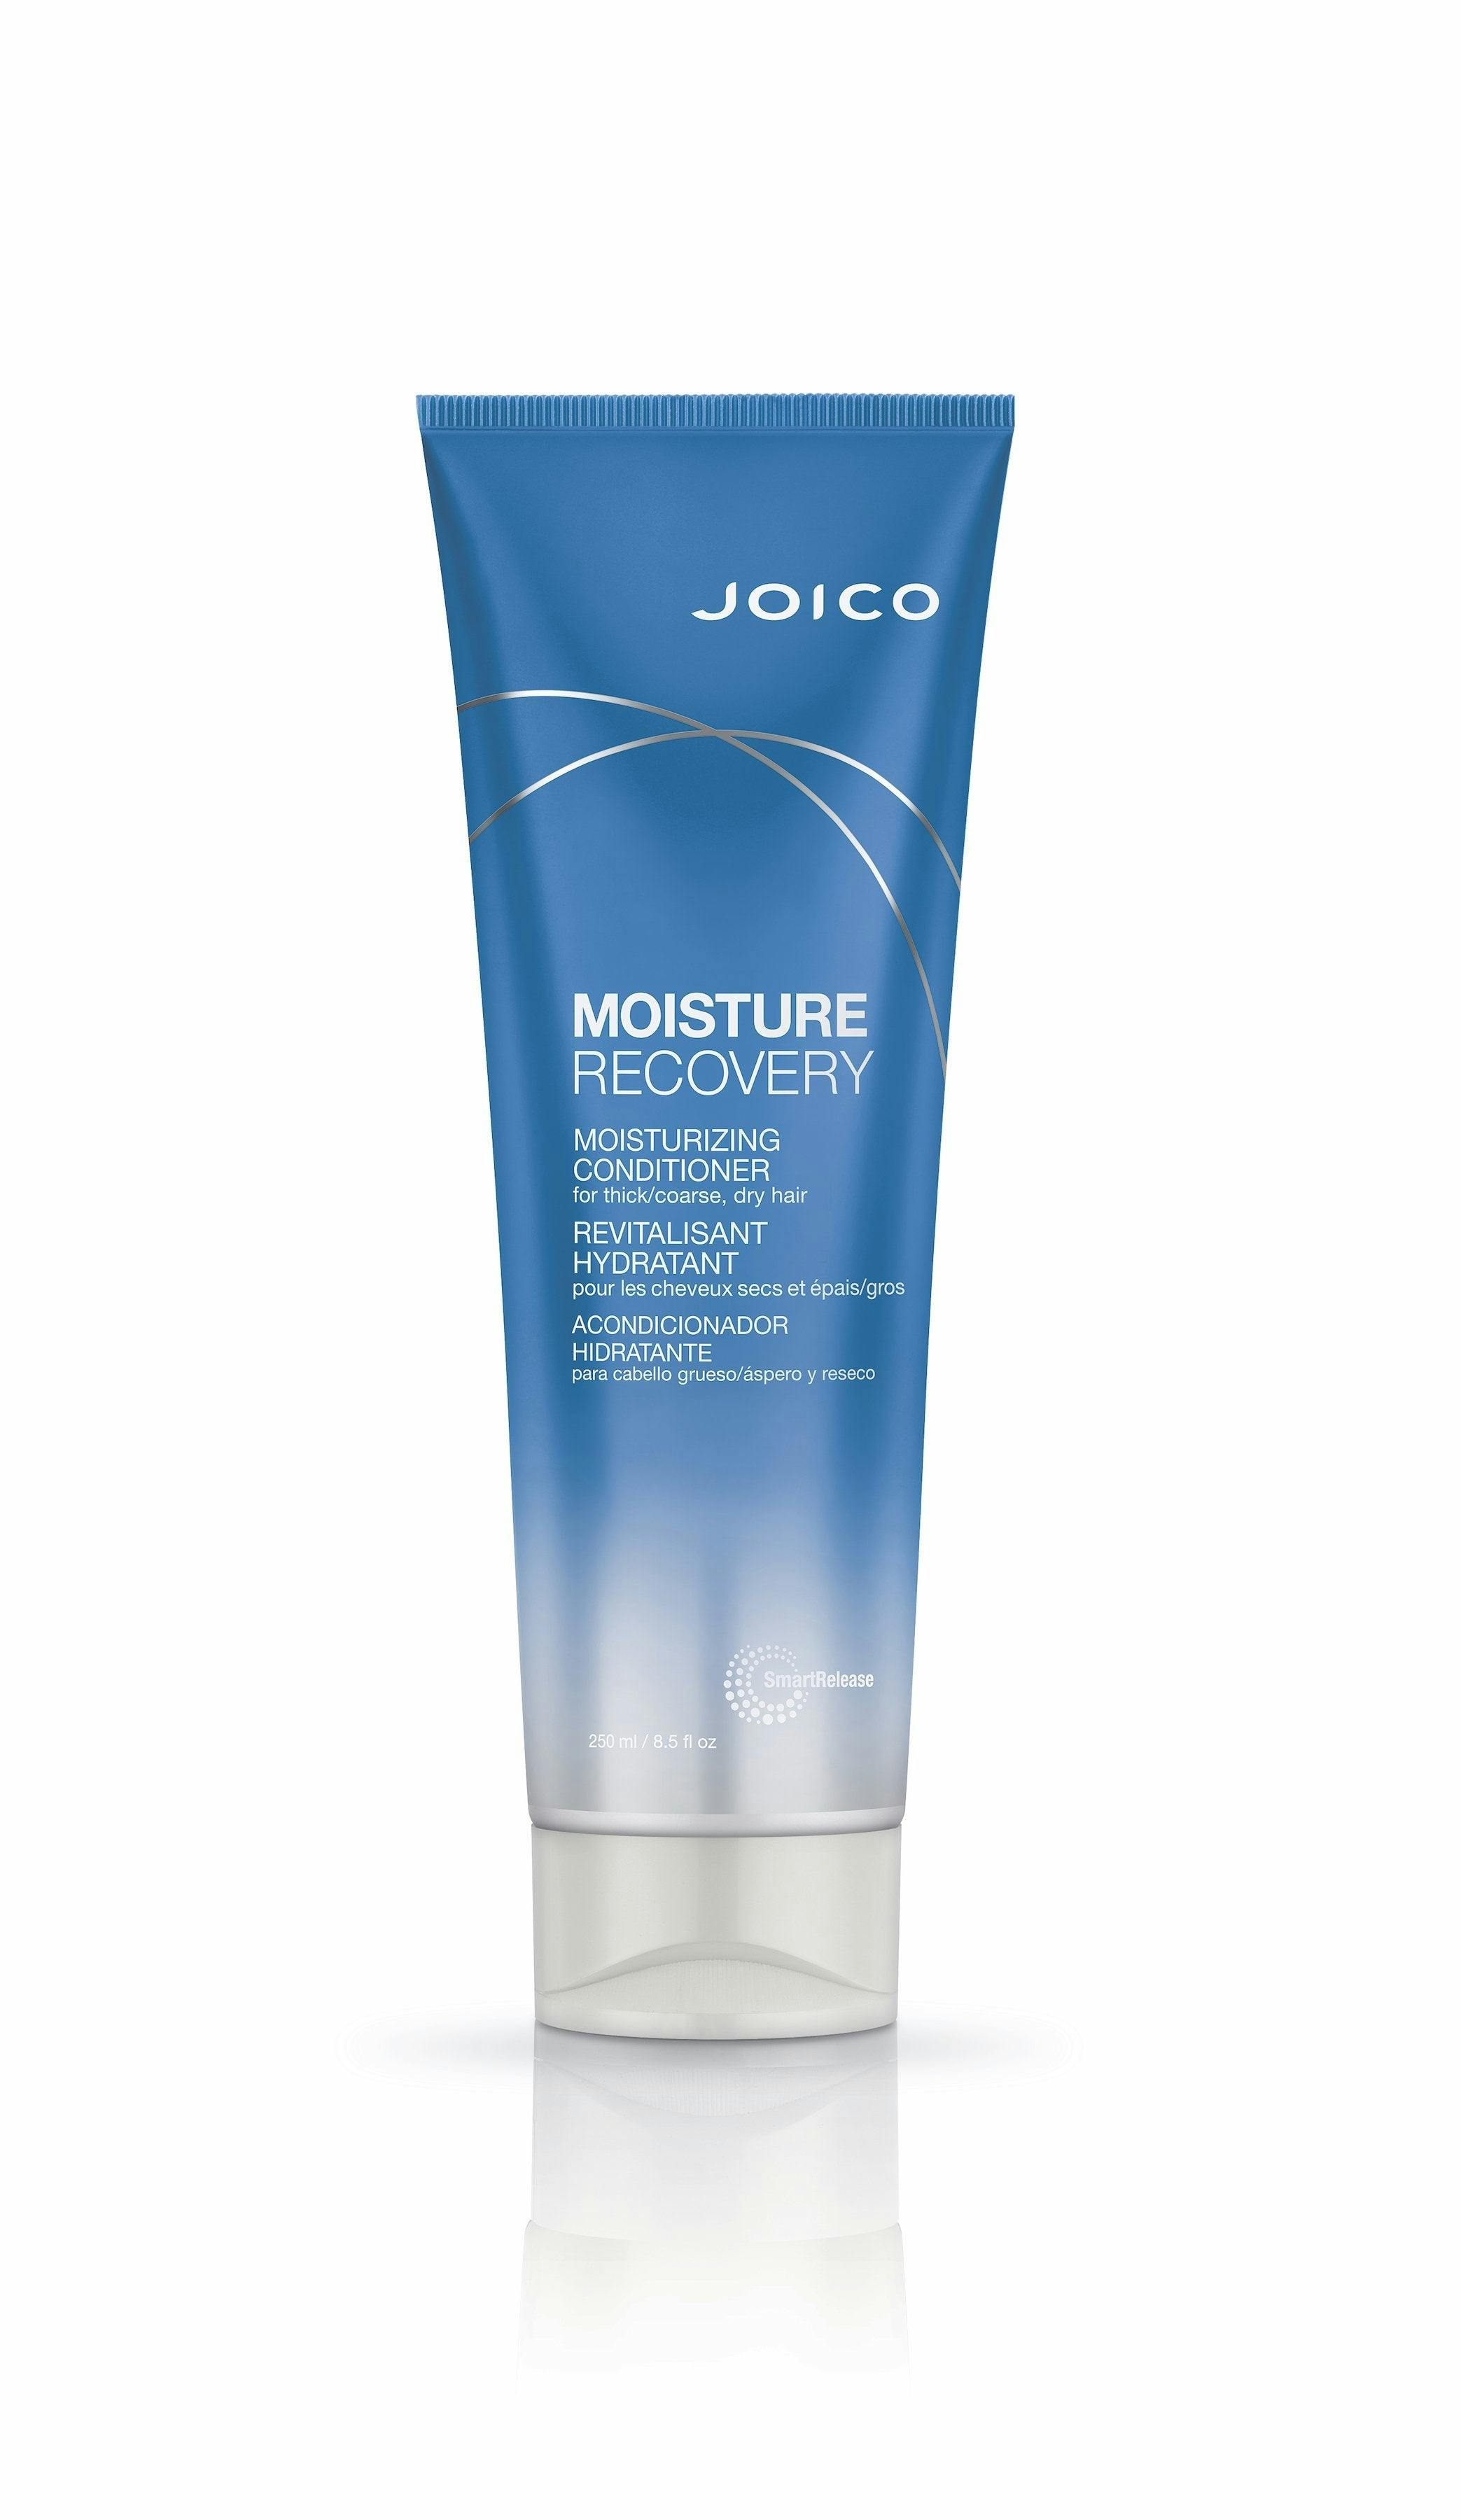 Joico Moisture Recovery Shampoo 10.1 oz and Conditioner 8.5 oz Set for Dry  Hair